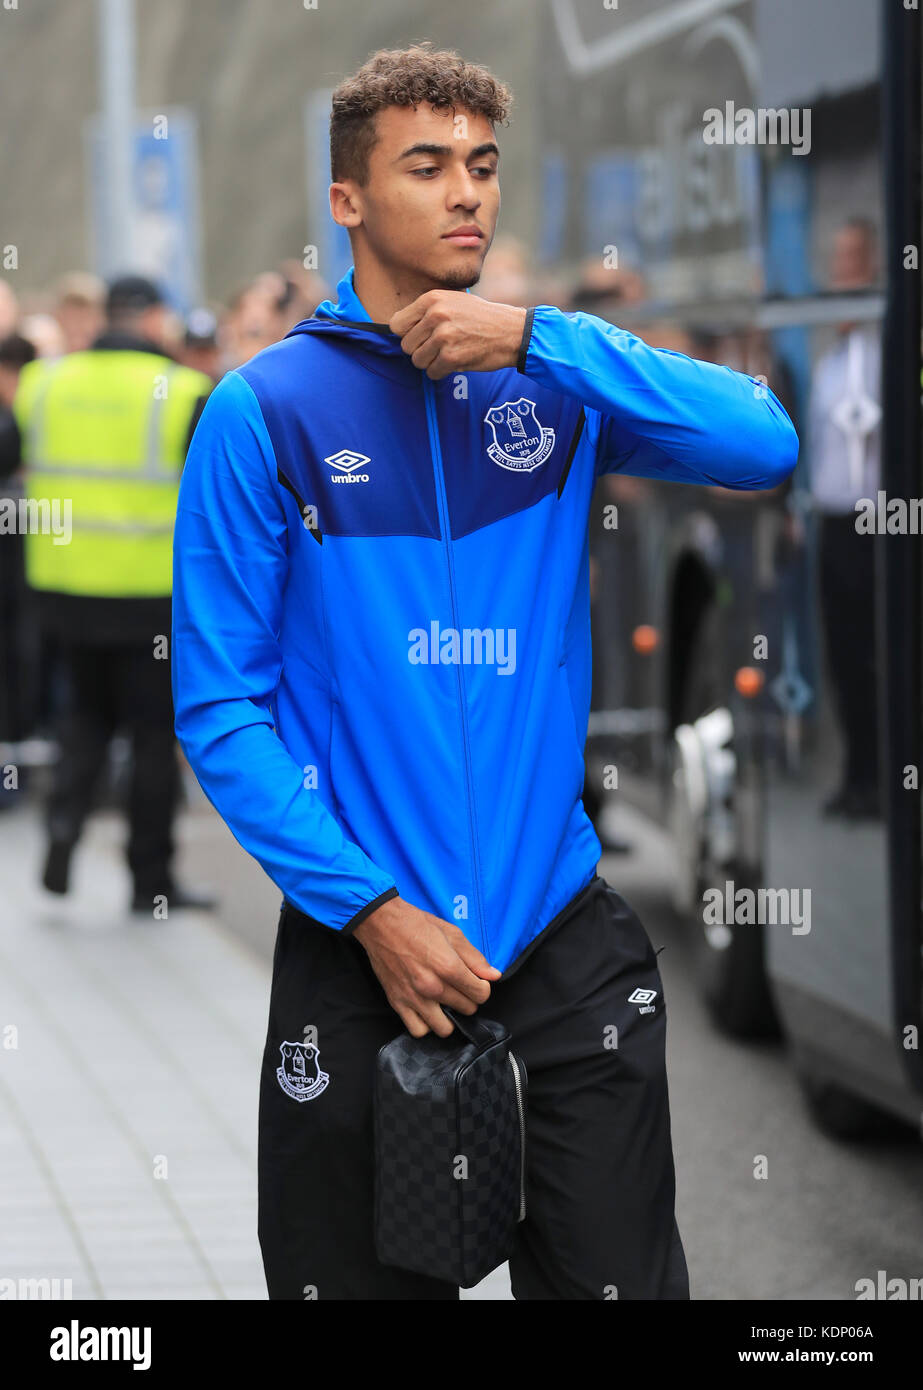 Everton's Dominic Calvert-Lewin arriving ahead of the Premier League match at the AMEX Stadium, Brighton. PRESS ASSOCIATION Photo. Picture date: Sunday October 15, 2017. See PA story SOCCER Brighton. Photo credit should read: Gareth Fuller/PA Wire. RESTRICTIONS: No use with unauthorised audio, video, data, fixture lists, club/league logos or 'live' services. Online in-match use limited to 75 images, no video emulation. No use in betting, games or single club/league/player publications. Stock Photo